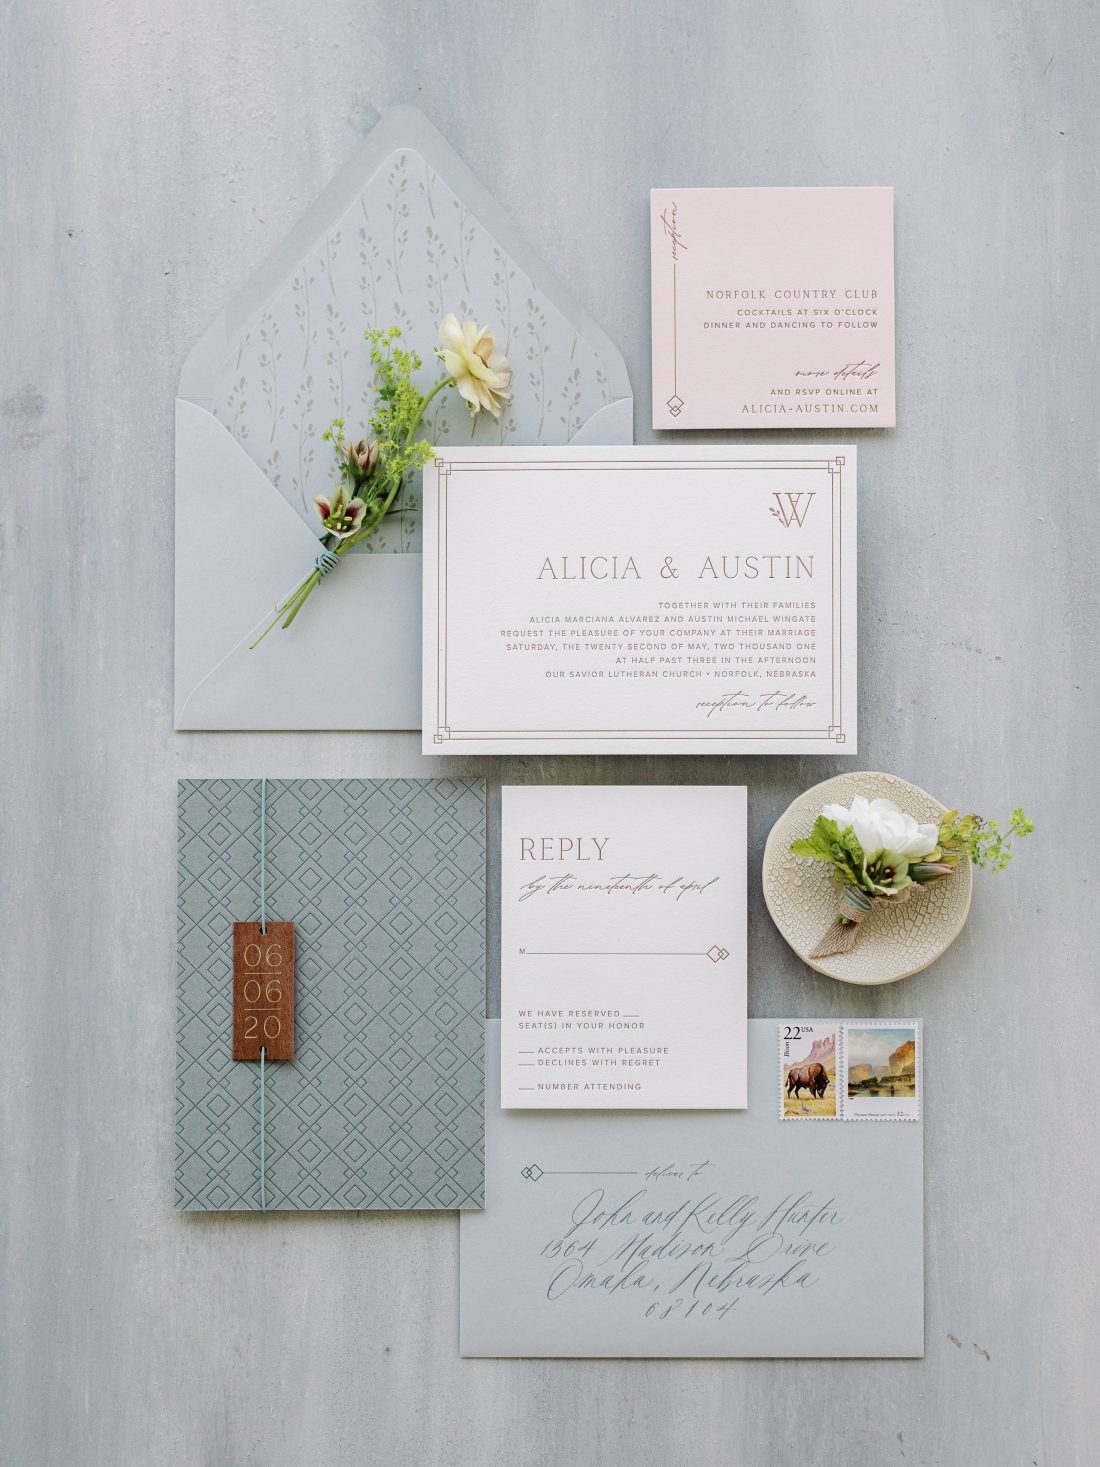 The letterpress invitations were pressed into a suede-textured paper. The warmth of the rust-colored ink provided a nice contrast to the blue duplexed paper and envelopes.